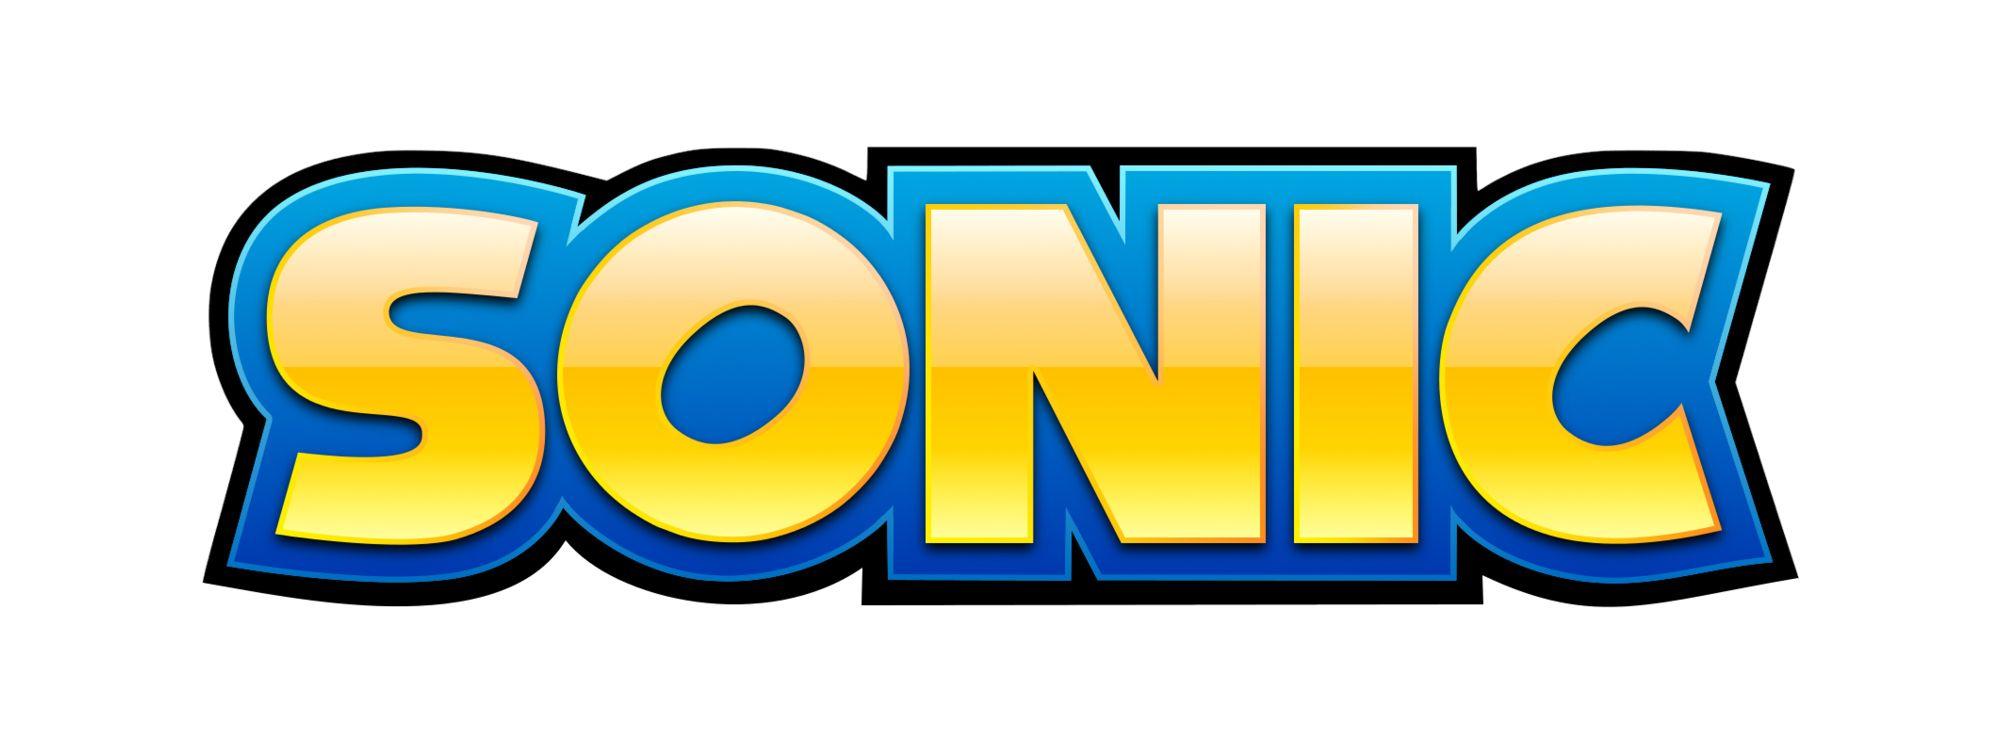 Yellow and Black Word Logo - Sonic Logo, Sonic Symbol, Meaning, History and Evolution